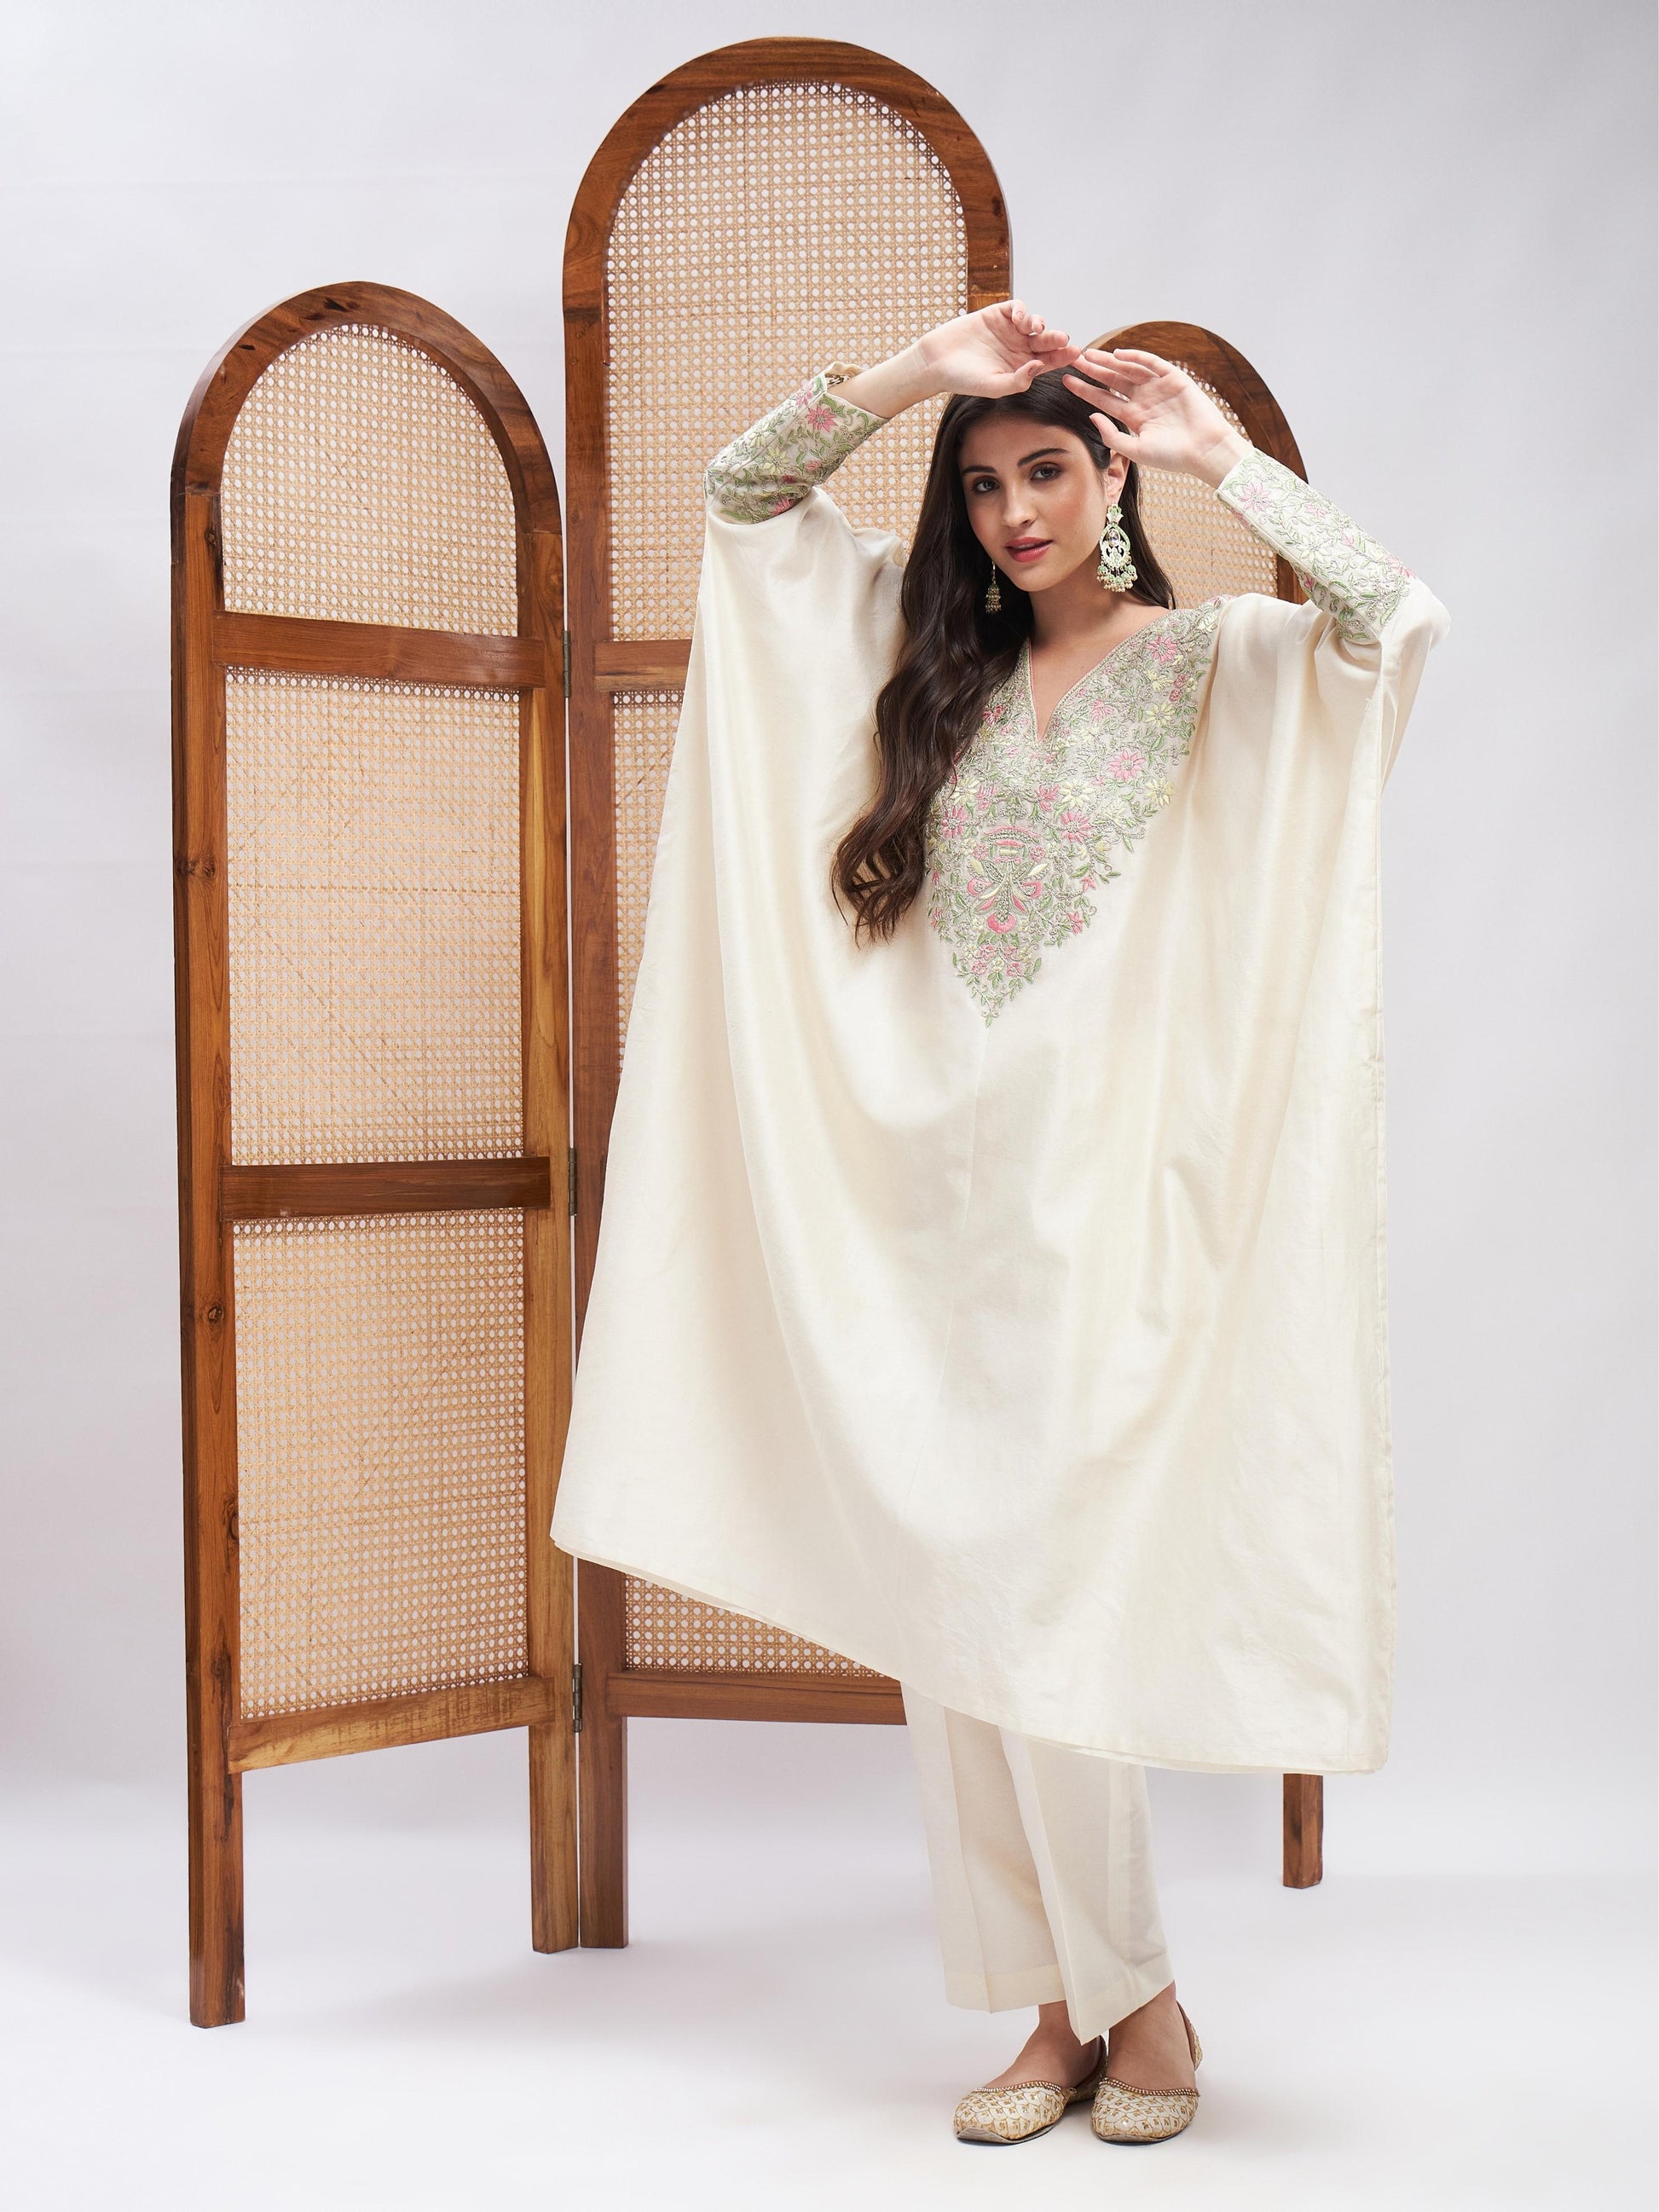 Off-White Chanderi Silk Kurta Set with Zari Embroidery at Kamakhyaa by RoohbyRidhimaa. This item is Chanderi Silk, Cotton, Embroidered, Festive Wear, Kurta Sets, Off-white, Relaxed Fit, Resham, Resham Embroidered, Silk Chanderi, Toxin free, Zari Embroidered